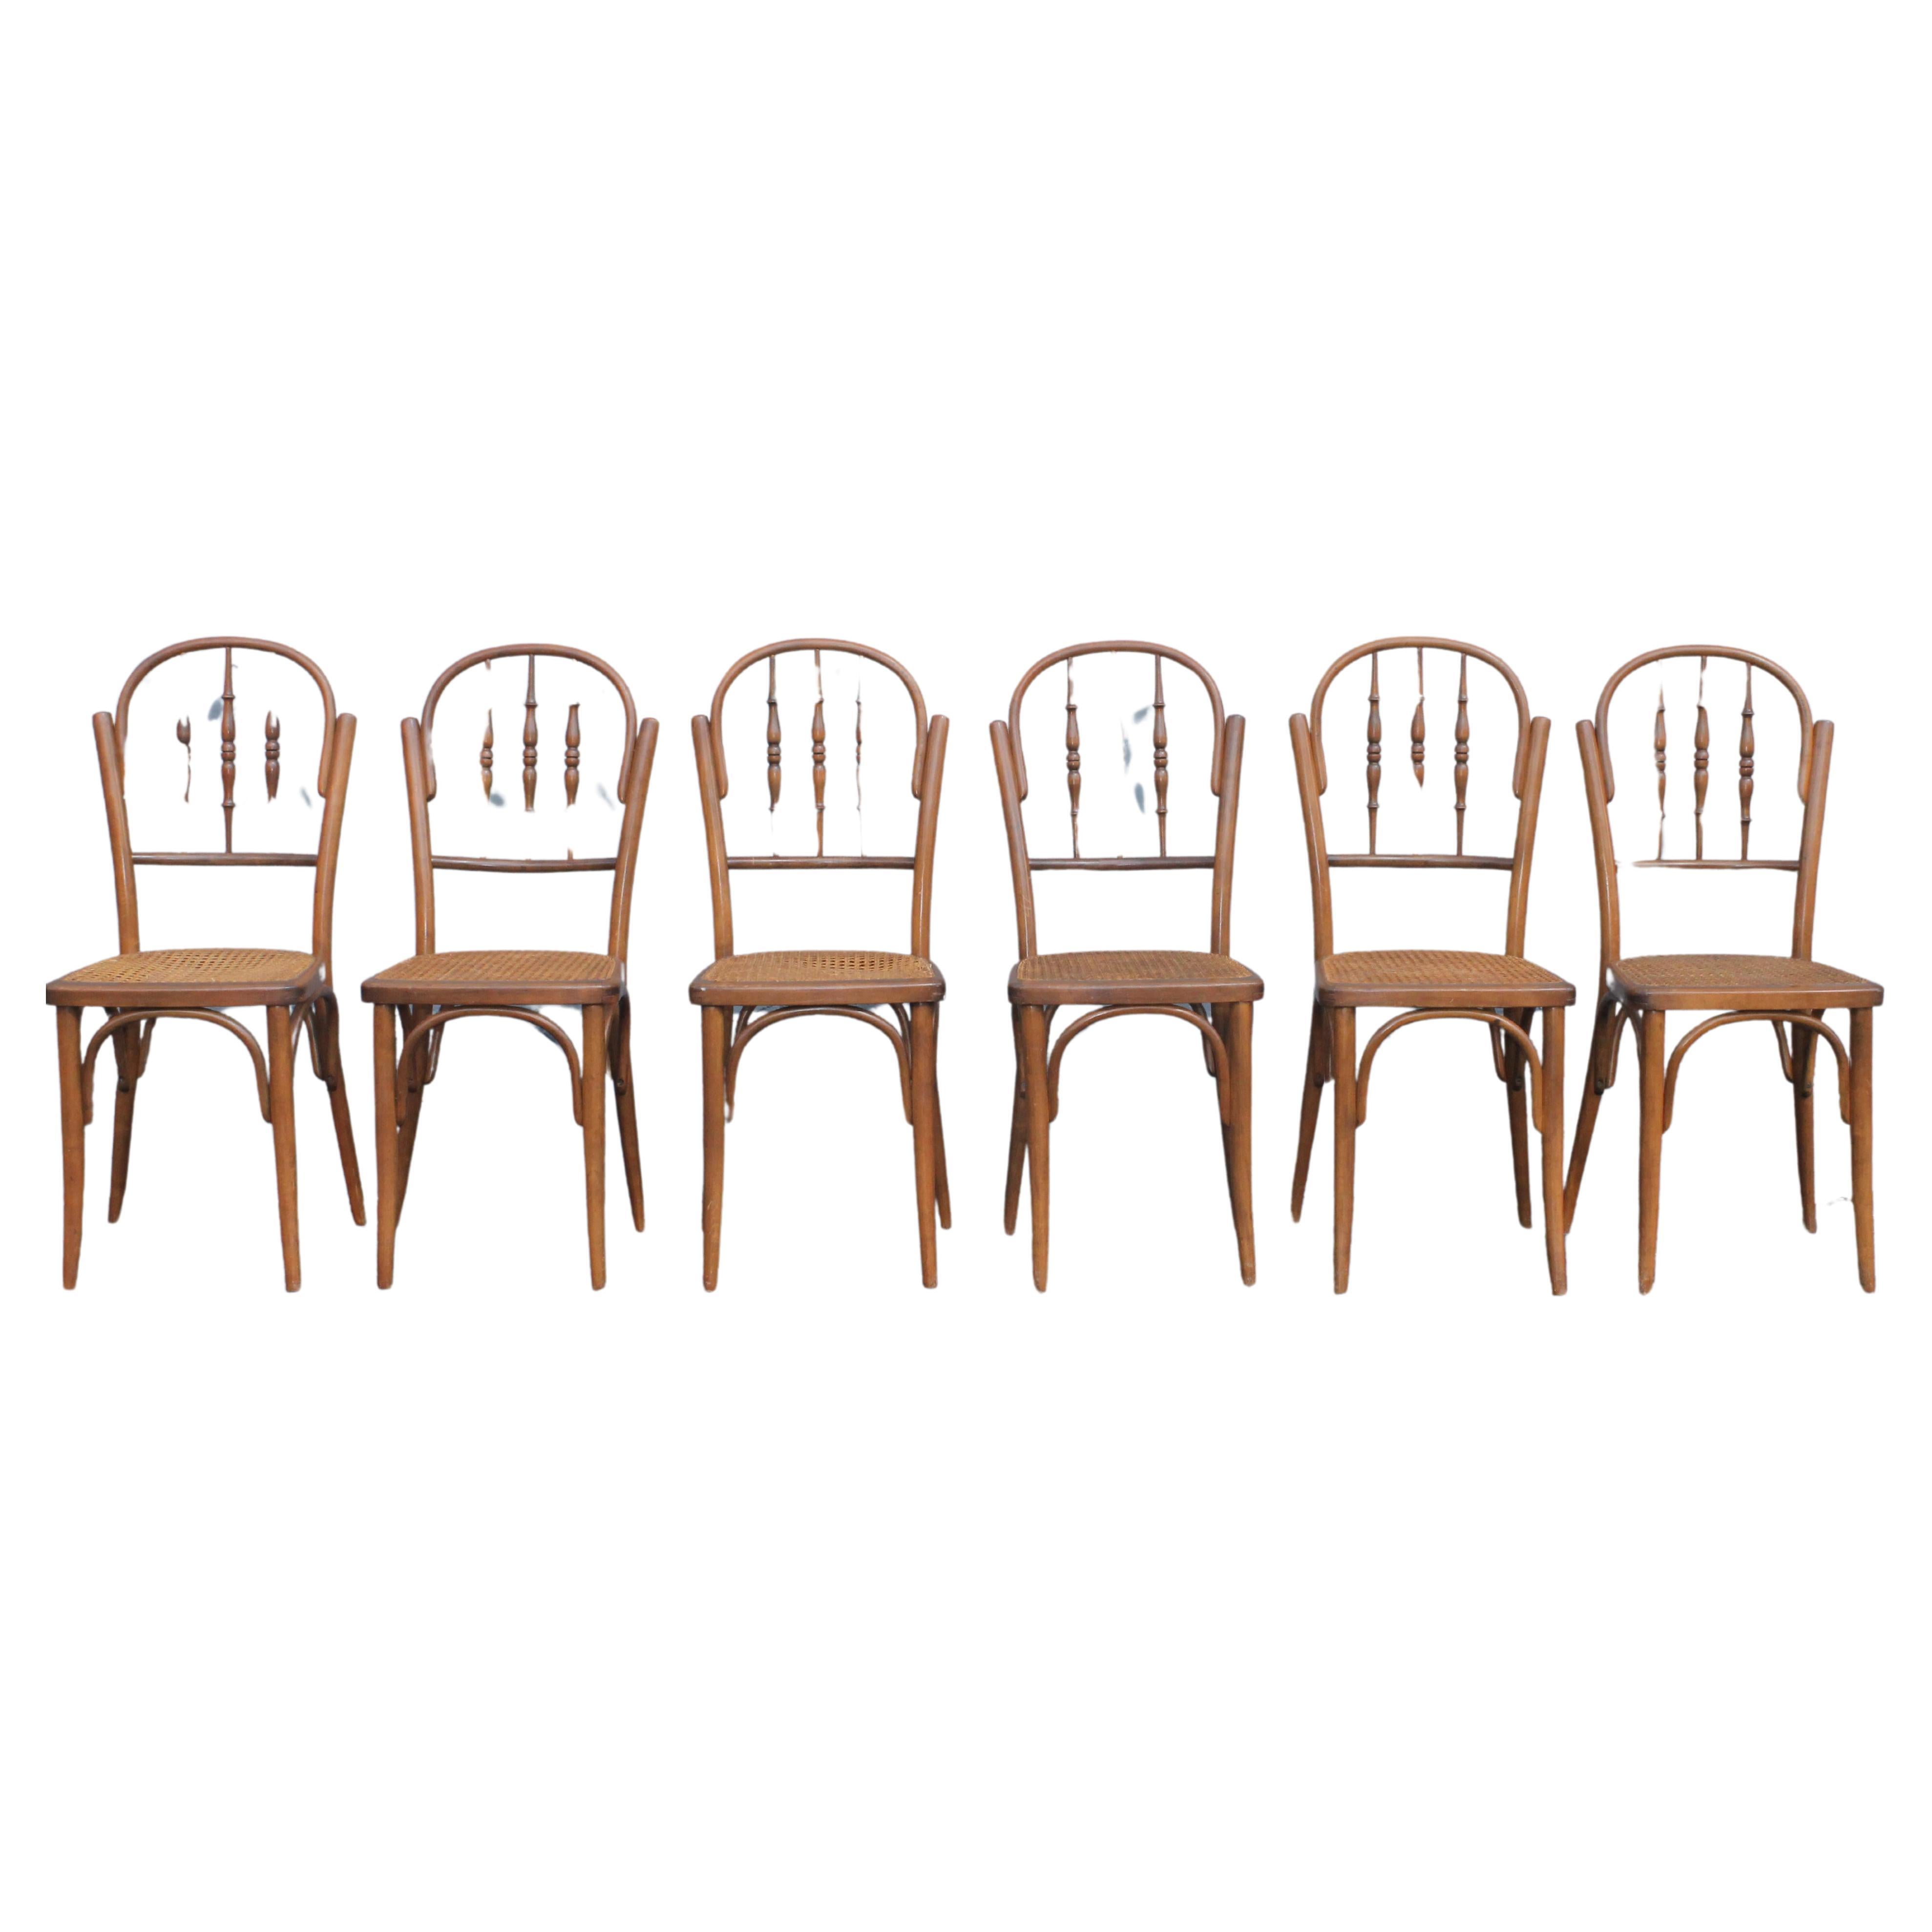 c1940's Set of 6 French Country Style Caned Dining Chairs For Sale